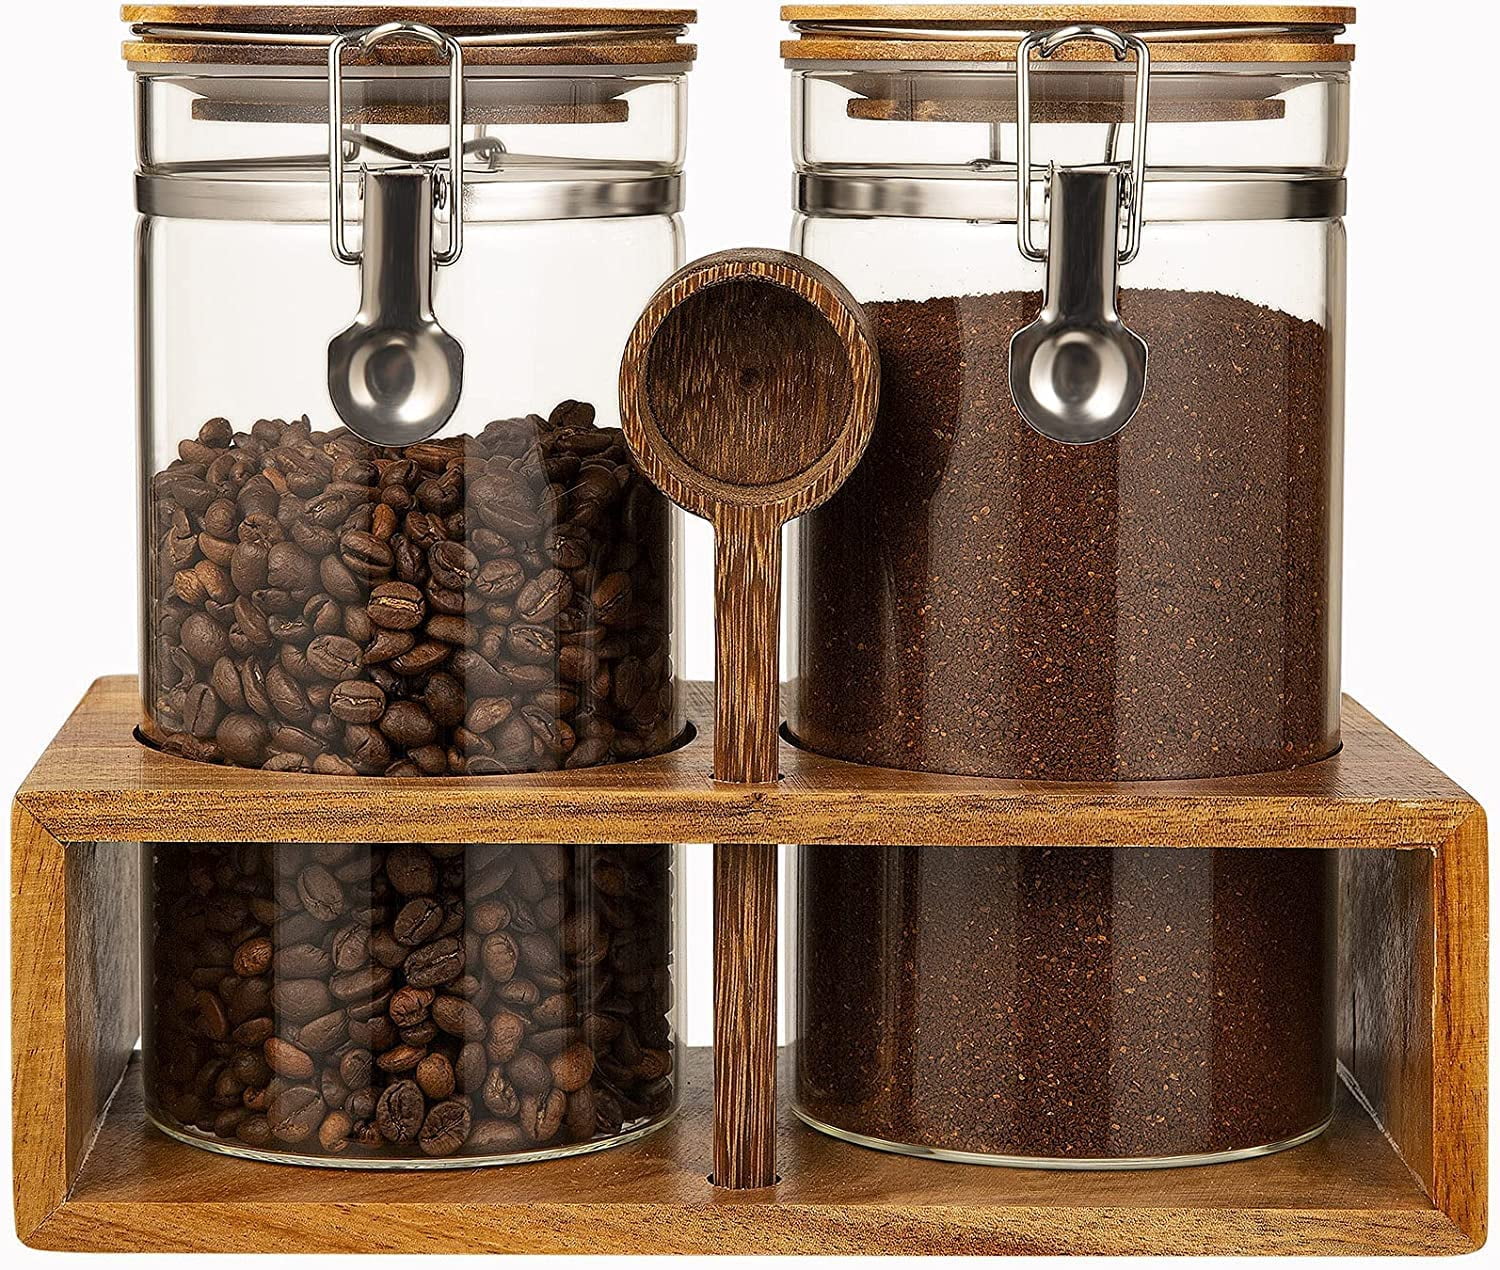 Glass Coffee Containers with Shelf Printed Coffee Bar- 2 Pcs 49oz